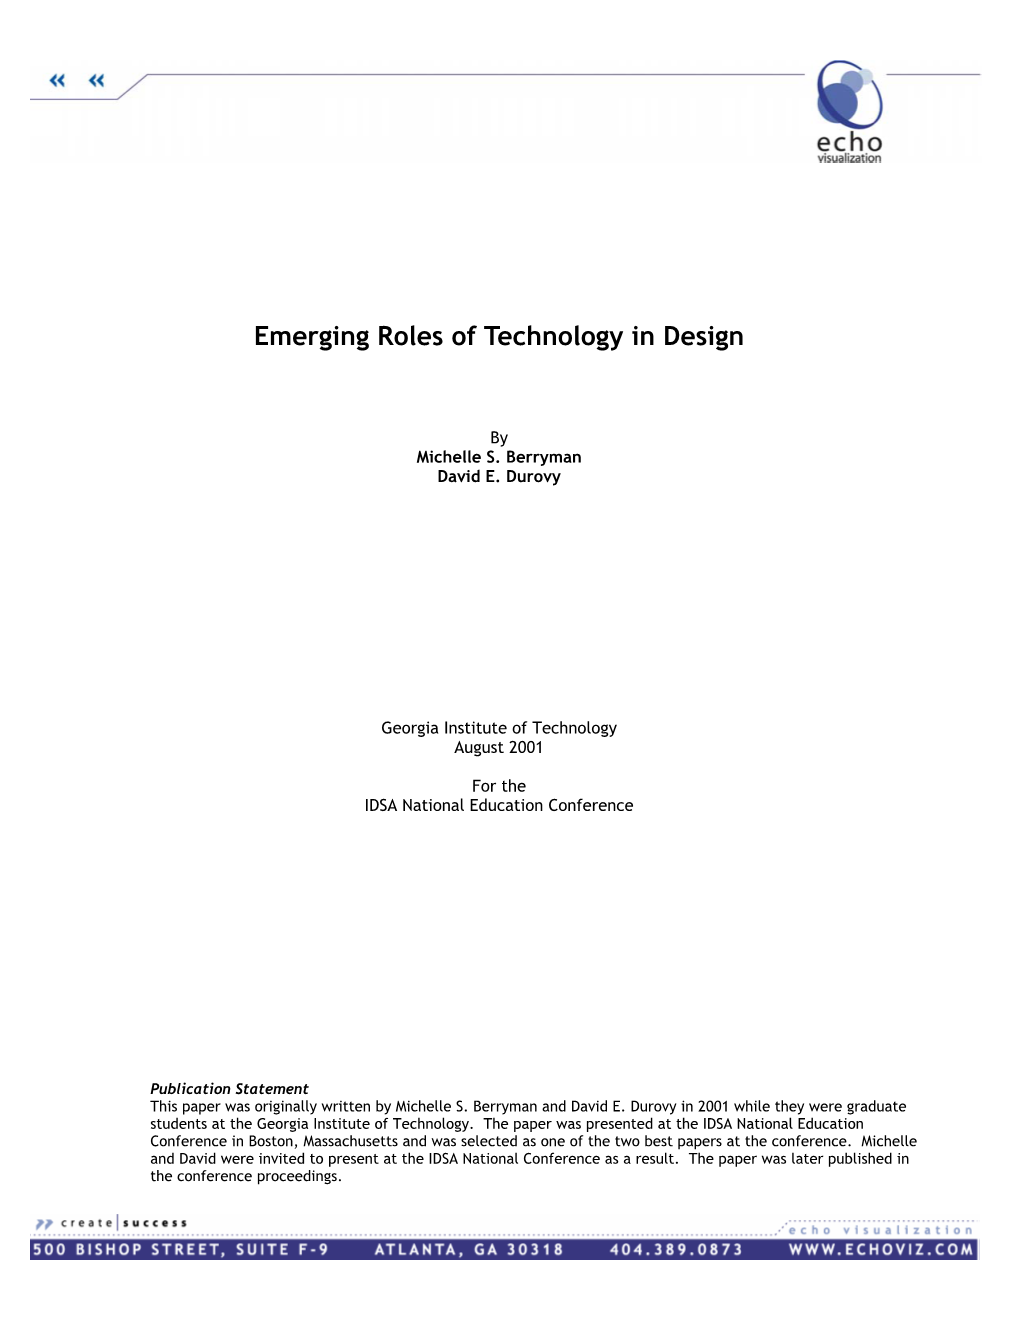 Emerging Roles of Technology in Design